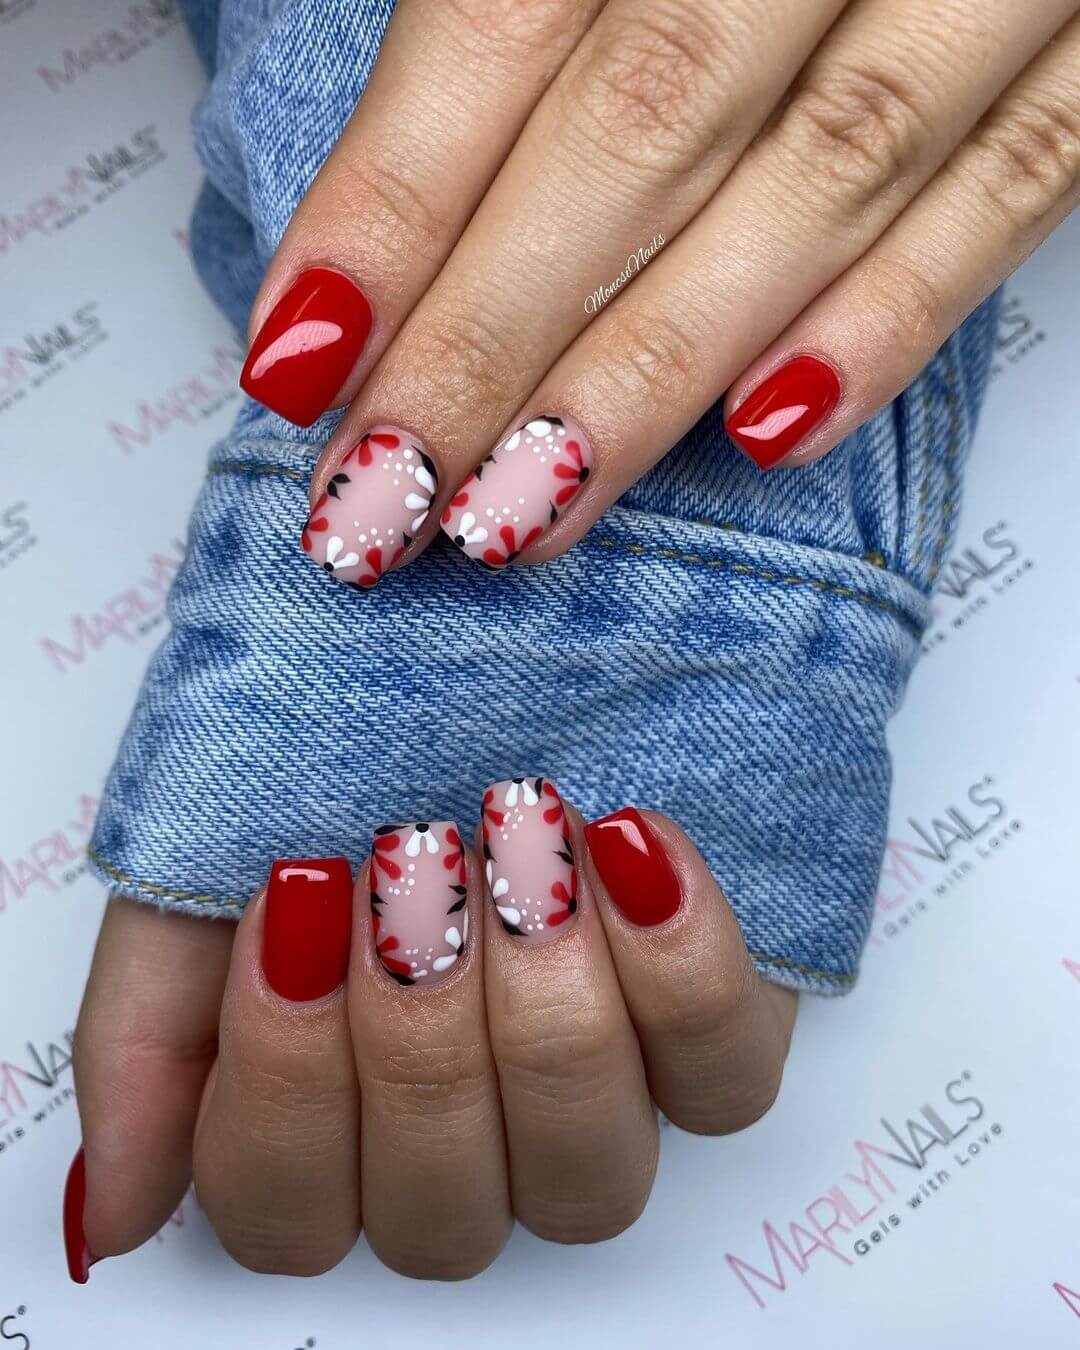 India Wedding Nail Art Designs Red with white and black combo